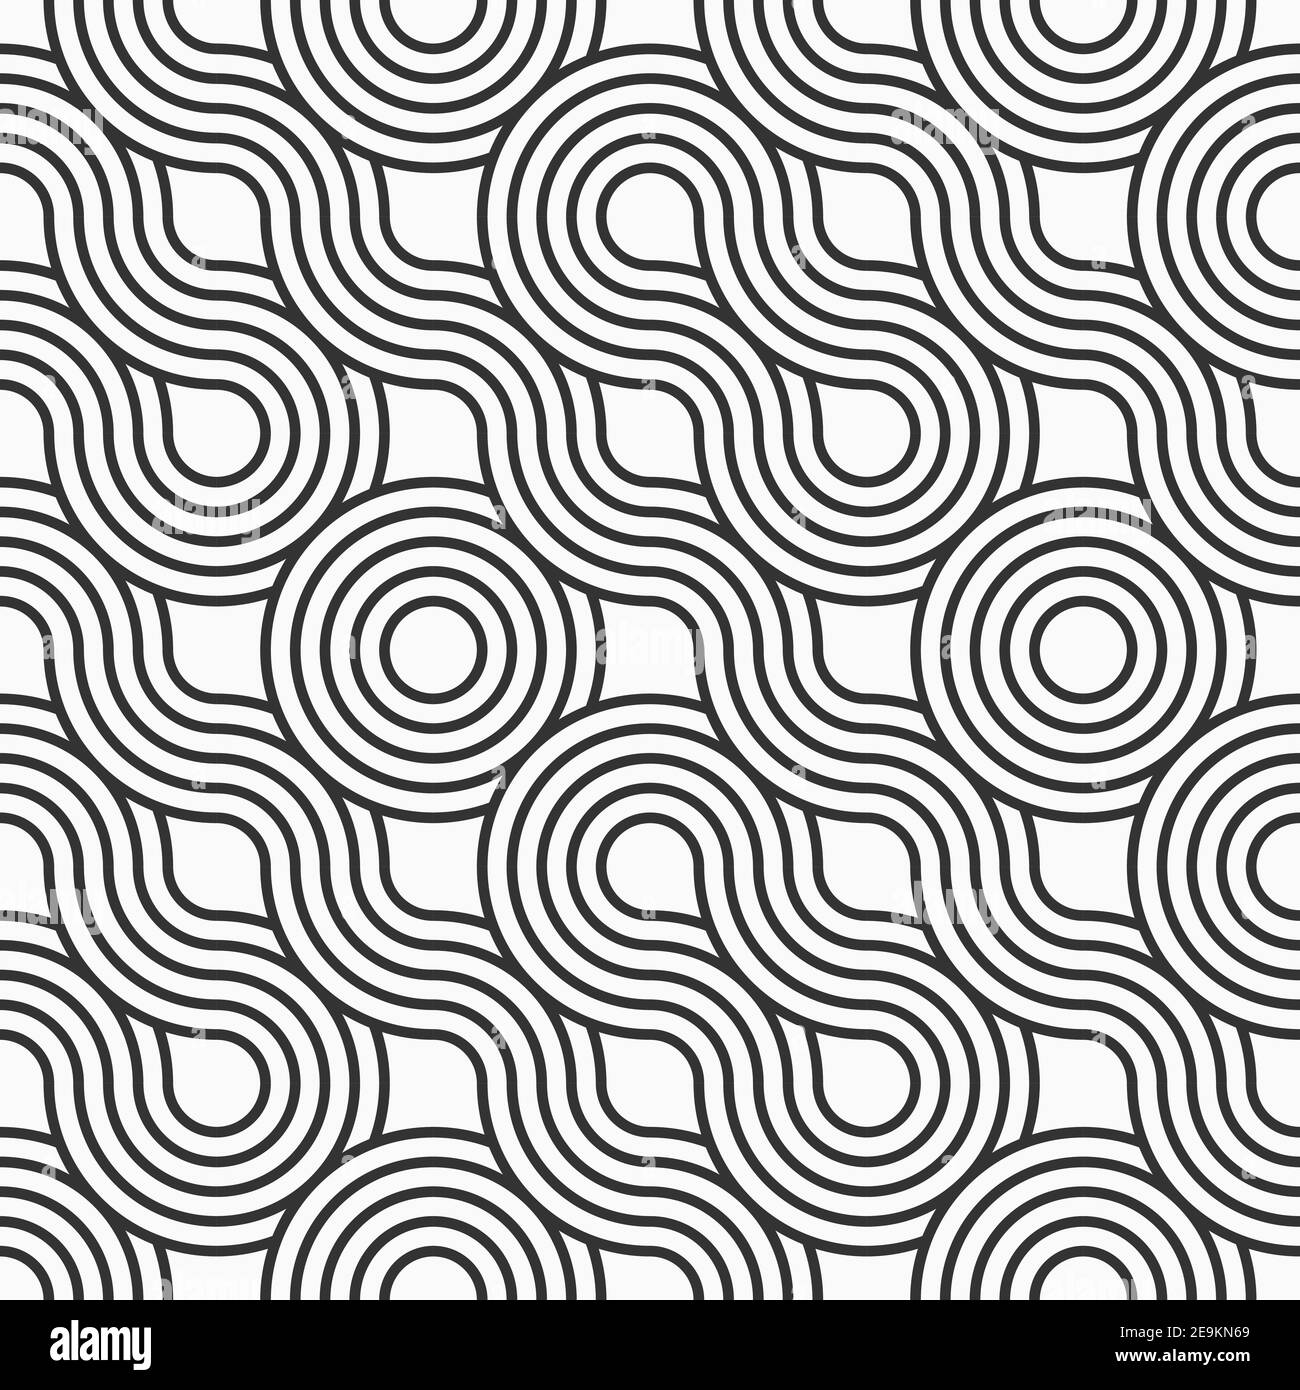 Abstract seamless. Seamless braided linear pattern, wavy lines, circles. Endless striped texture with winding elements. Vector geometric monochrome ba Stock Vector